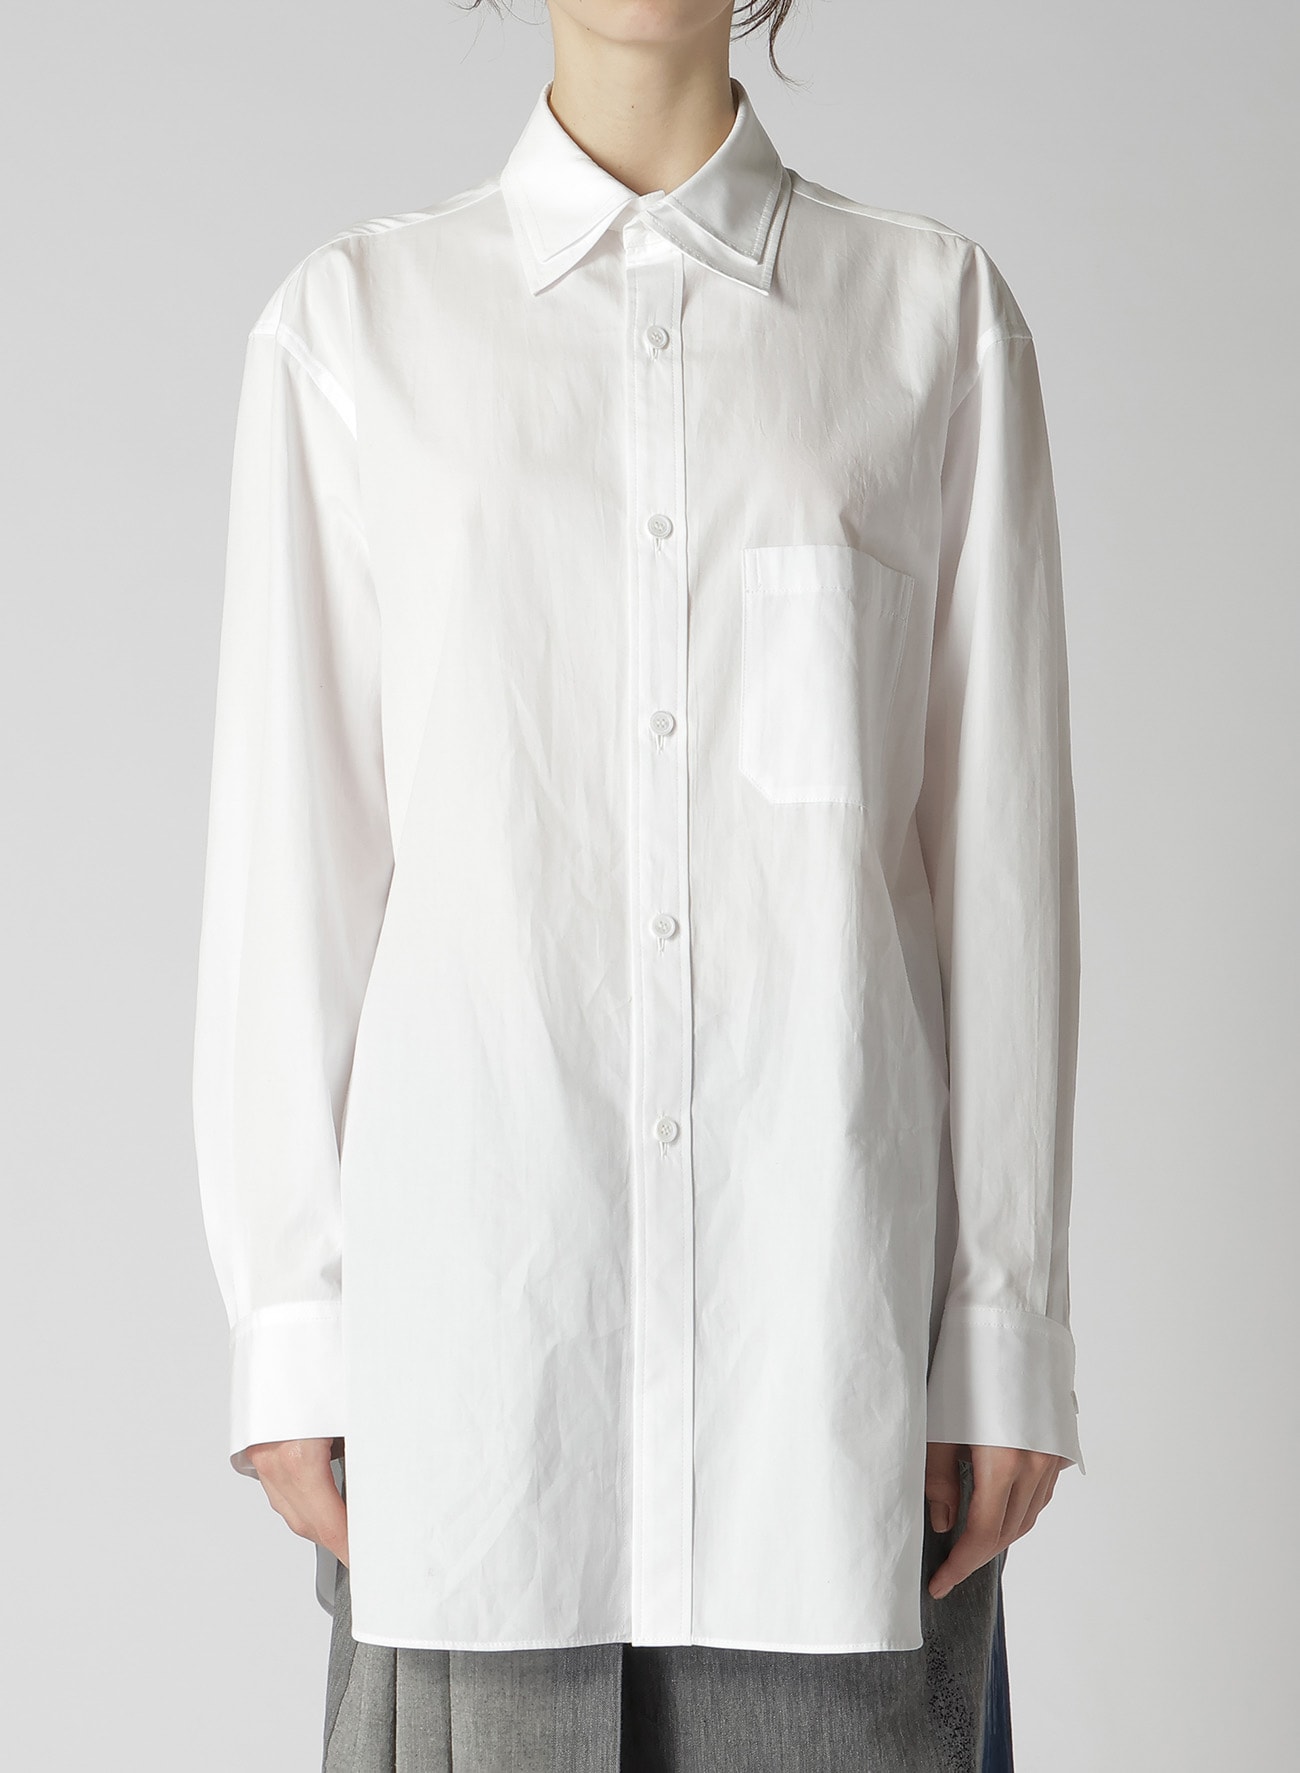 COTTON BROADCLOTH DOUBLE COLLAR SHIRT(XS White): Y's｜THE SHOP ...